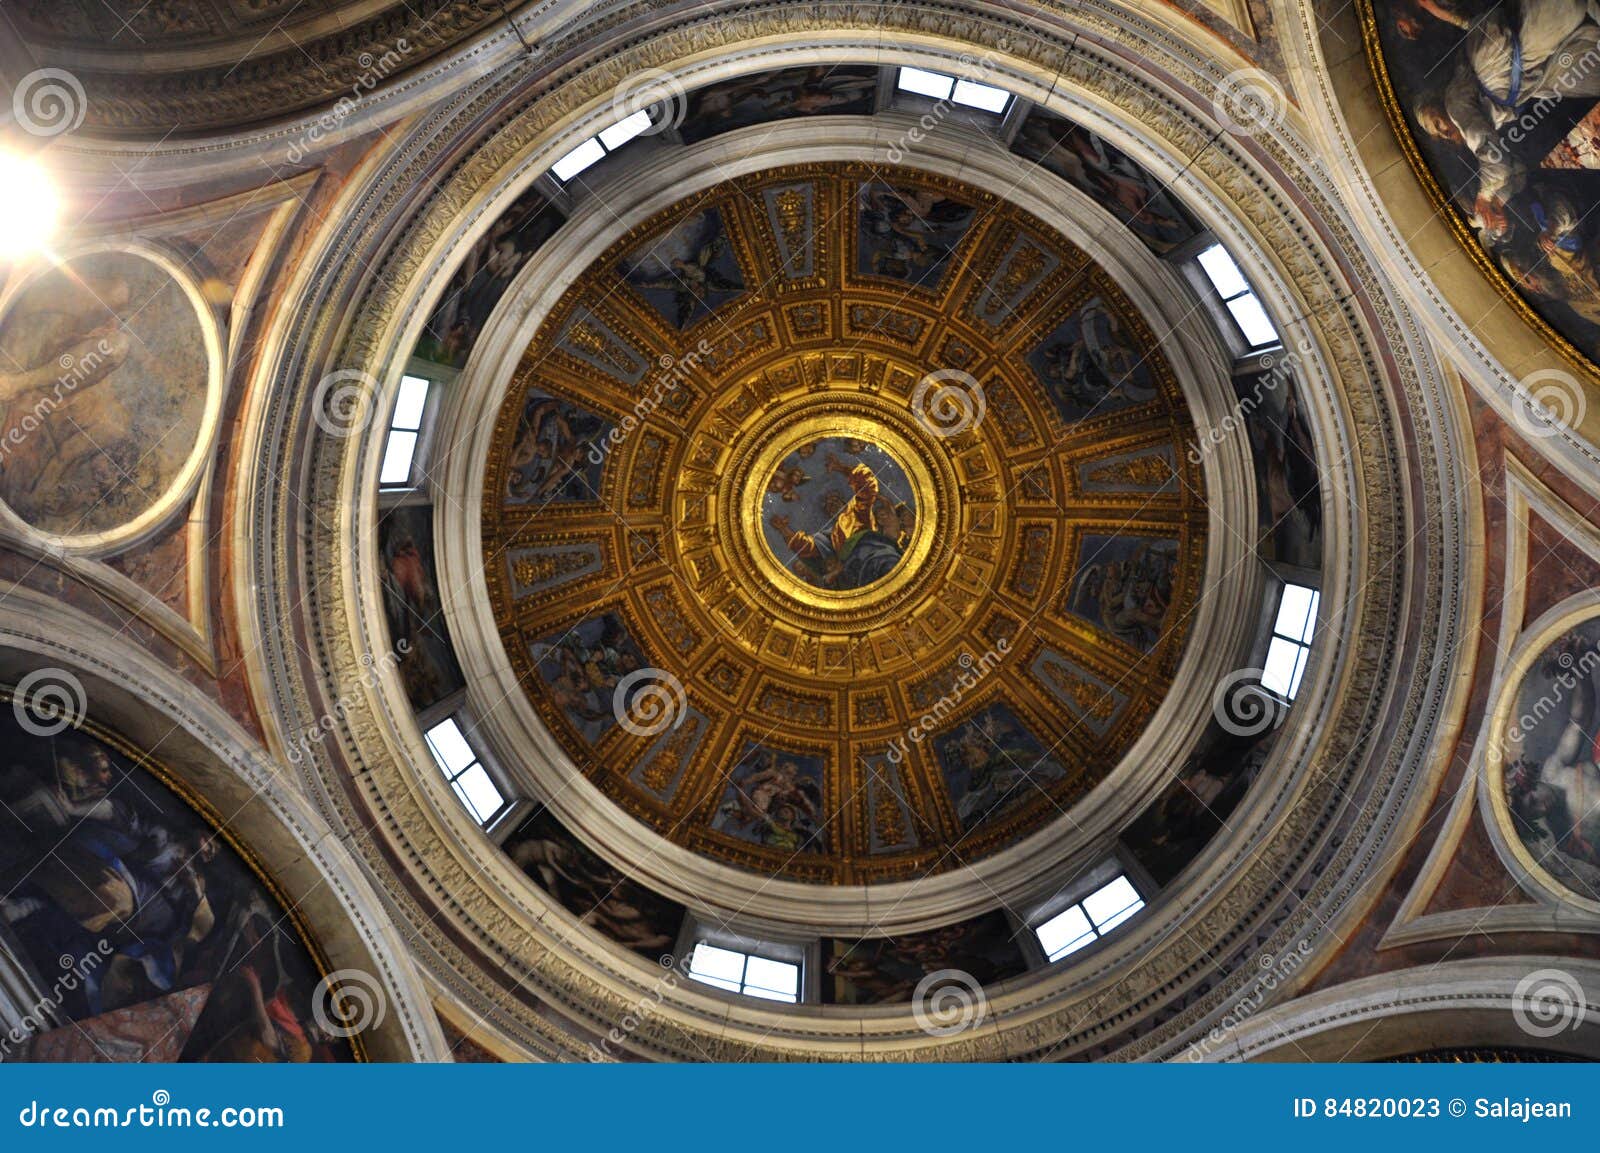 Painted Ceiling Of The Dome Of Santa Maria Del Popolo